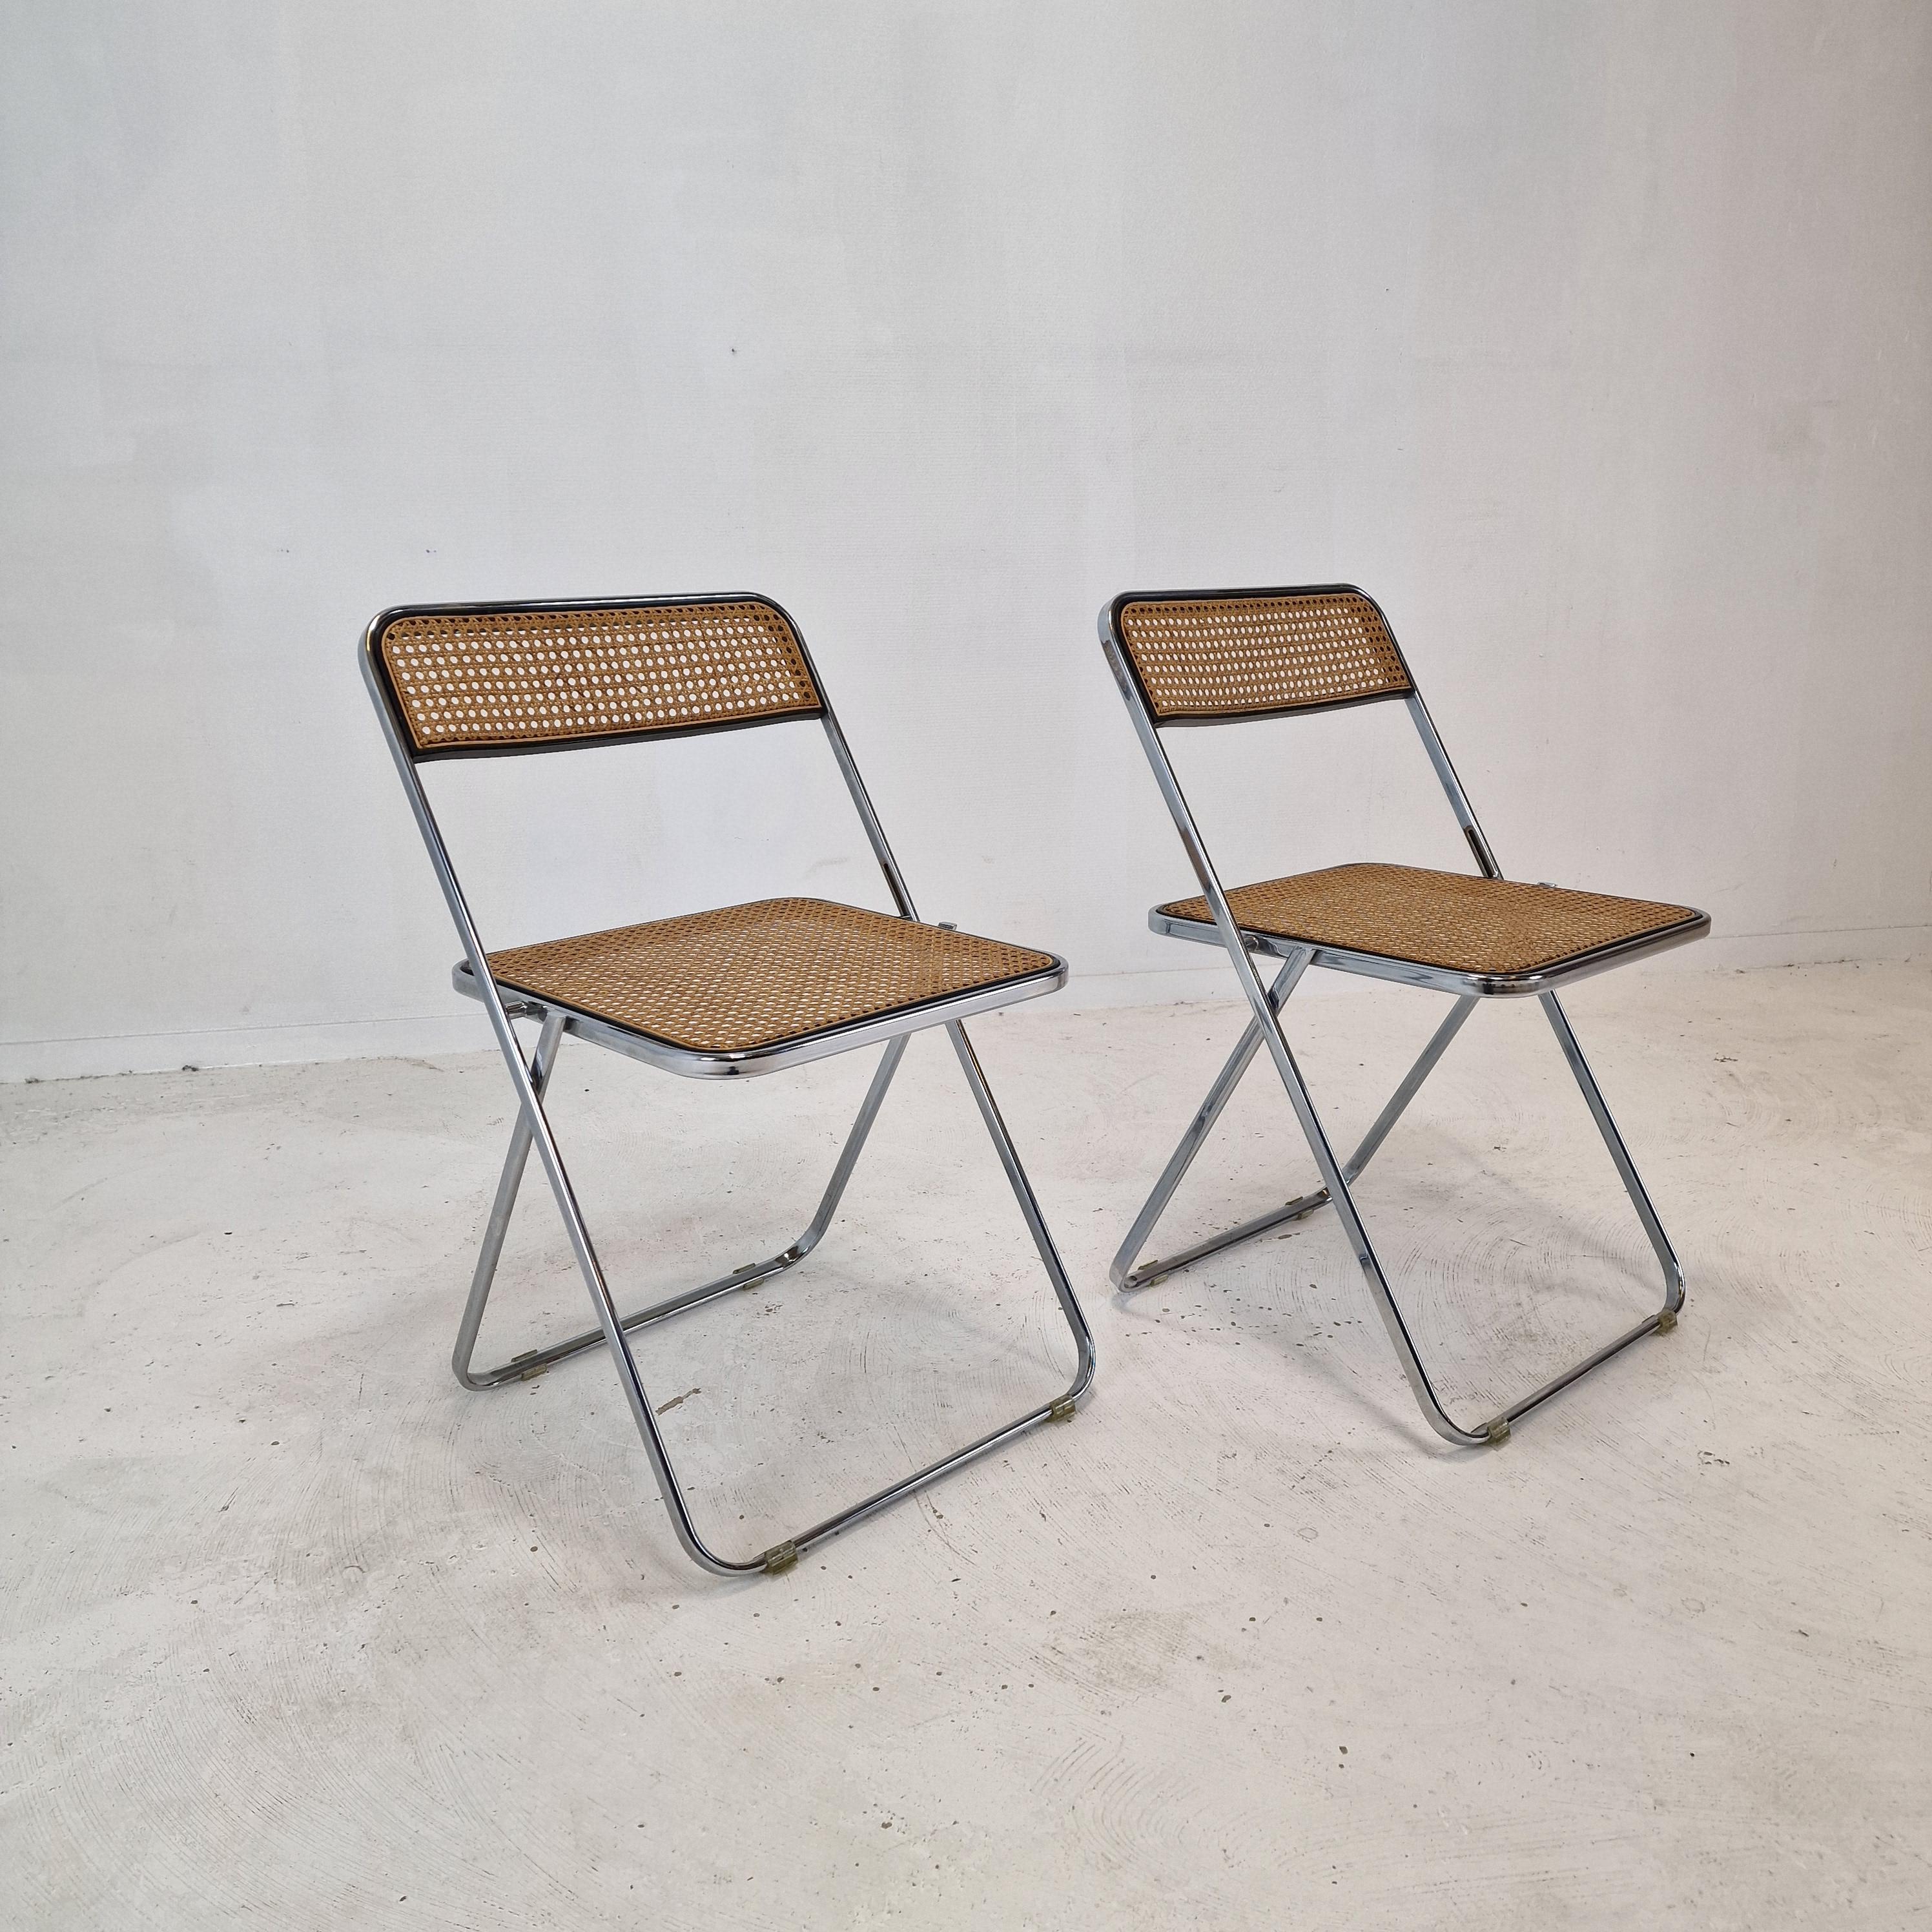 Very nice set of 2 Italian folding chairs, fabricated in the 80s.
The name of the chairs is 